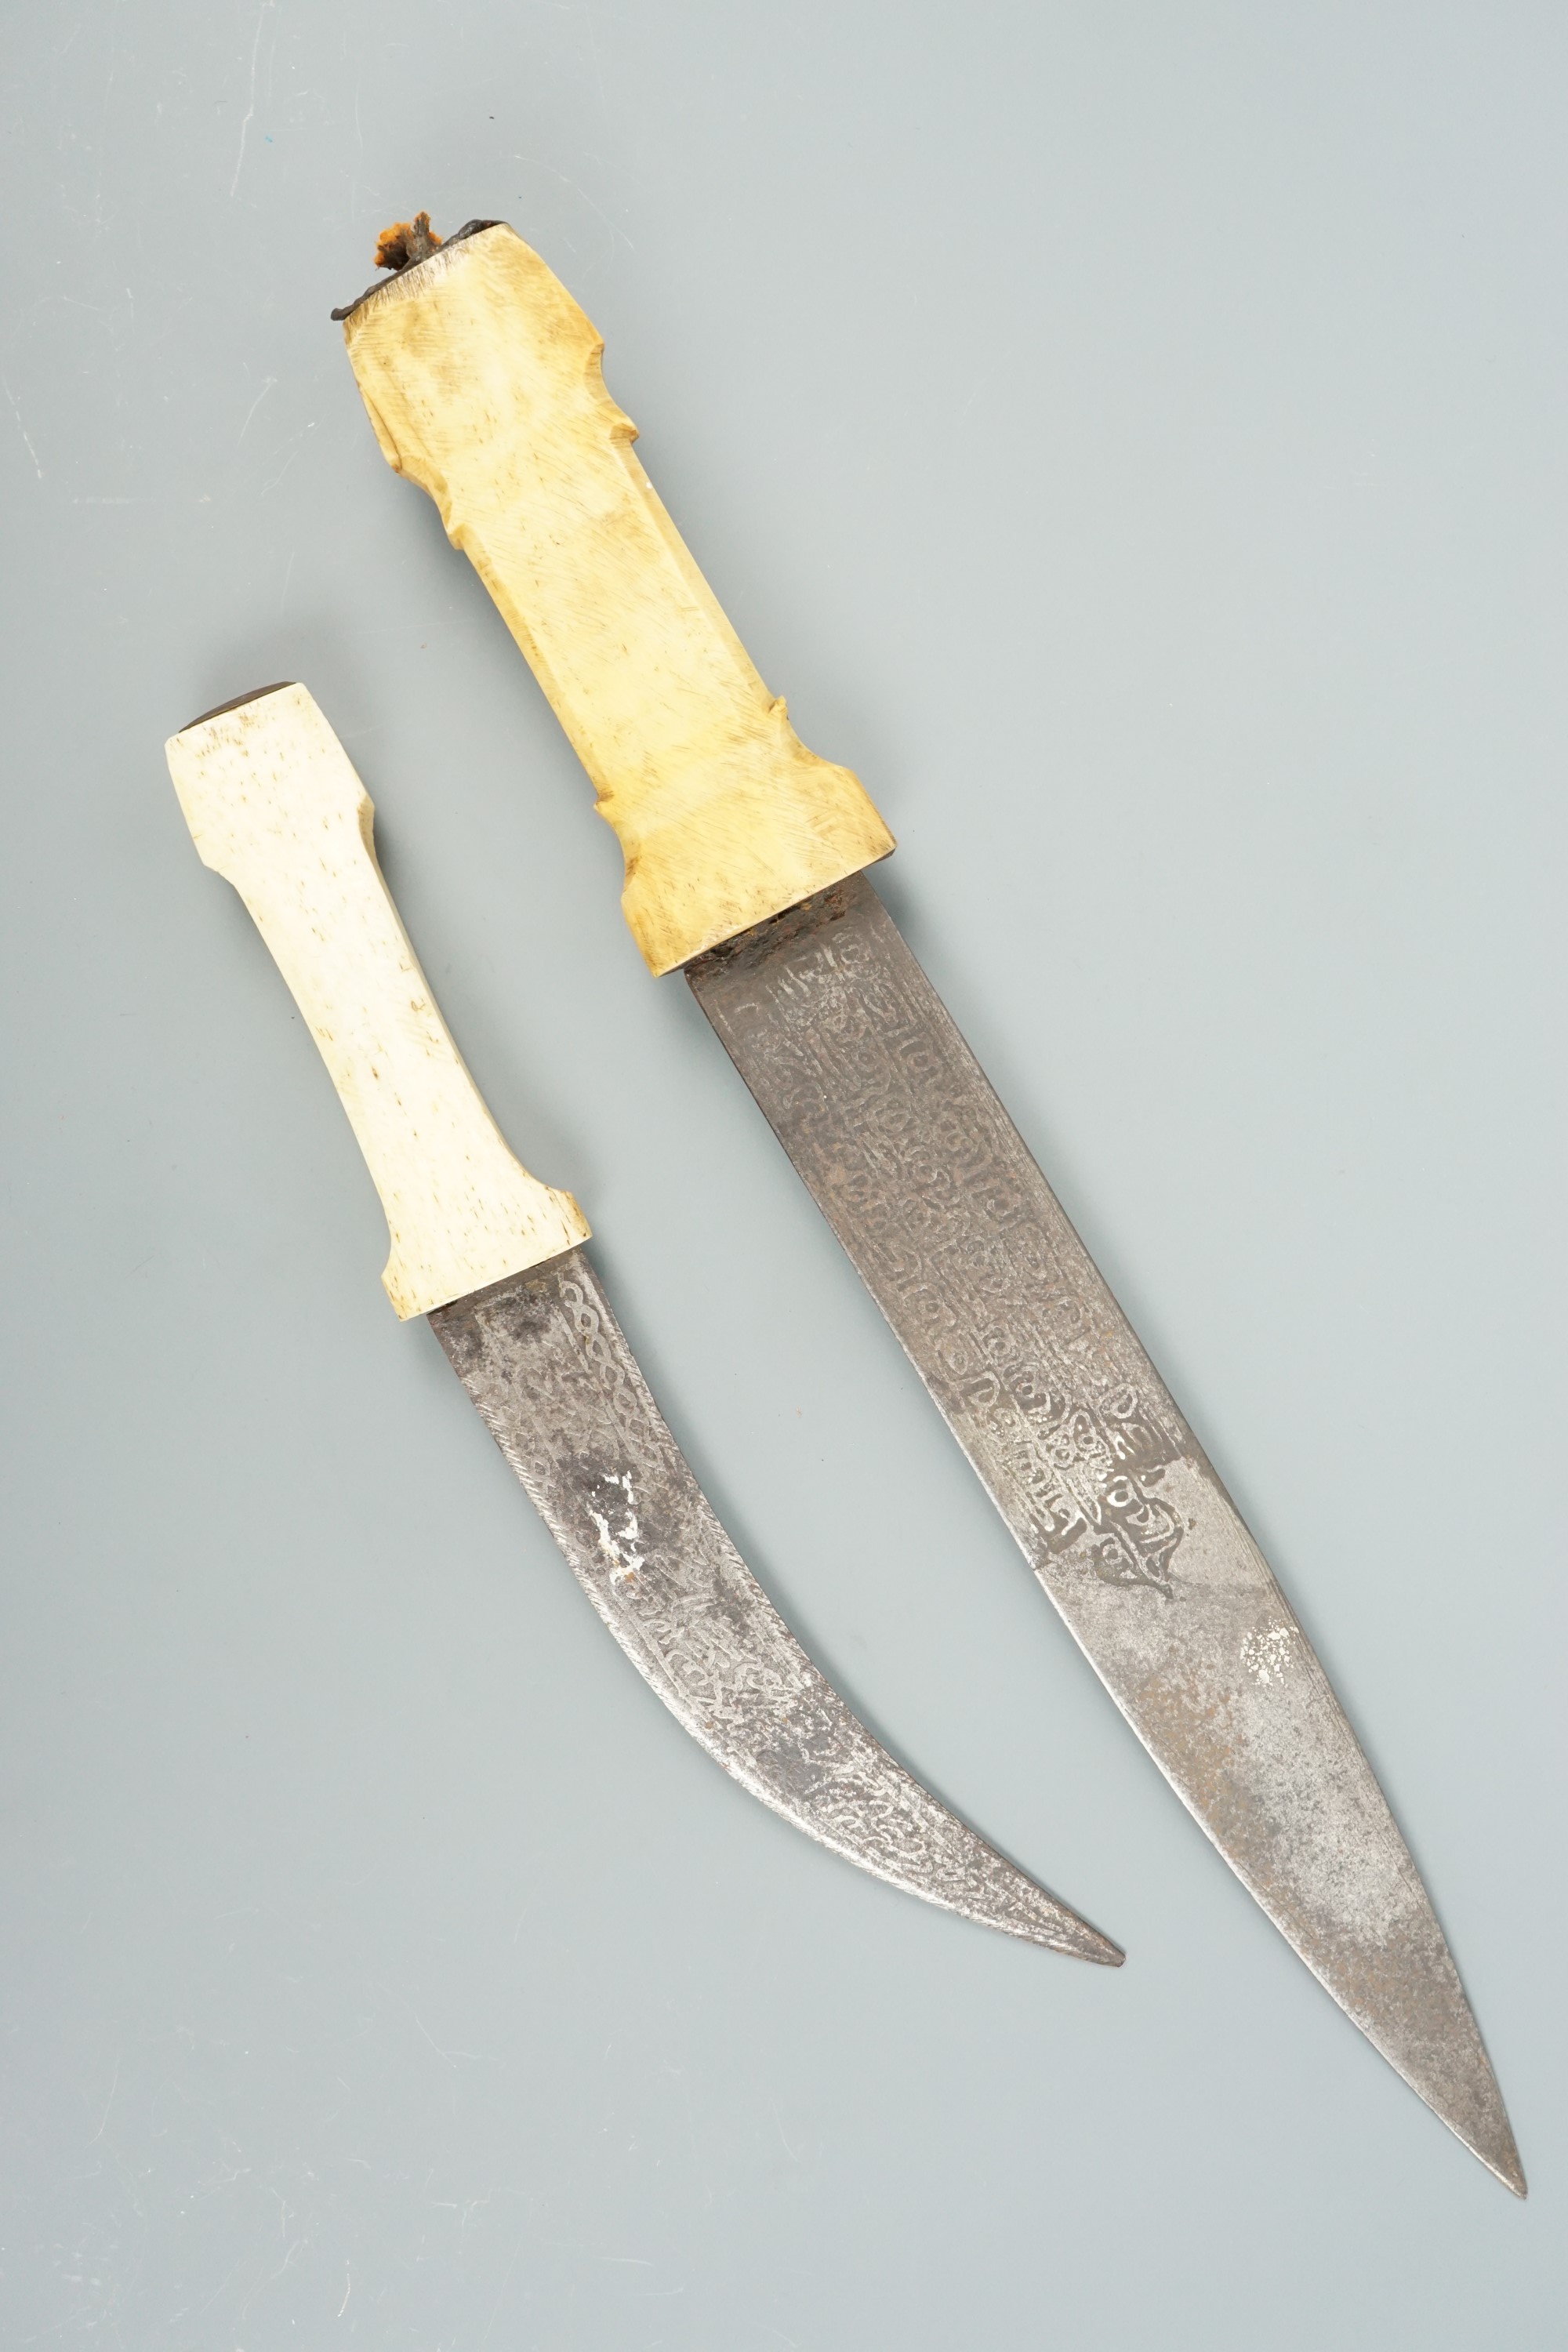 Two Middle Eastern bone-handled knives, having etched Islamic script on their blades